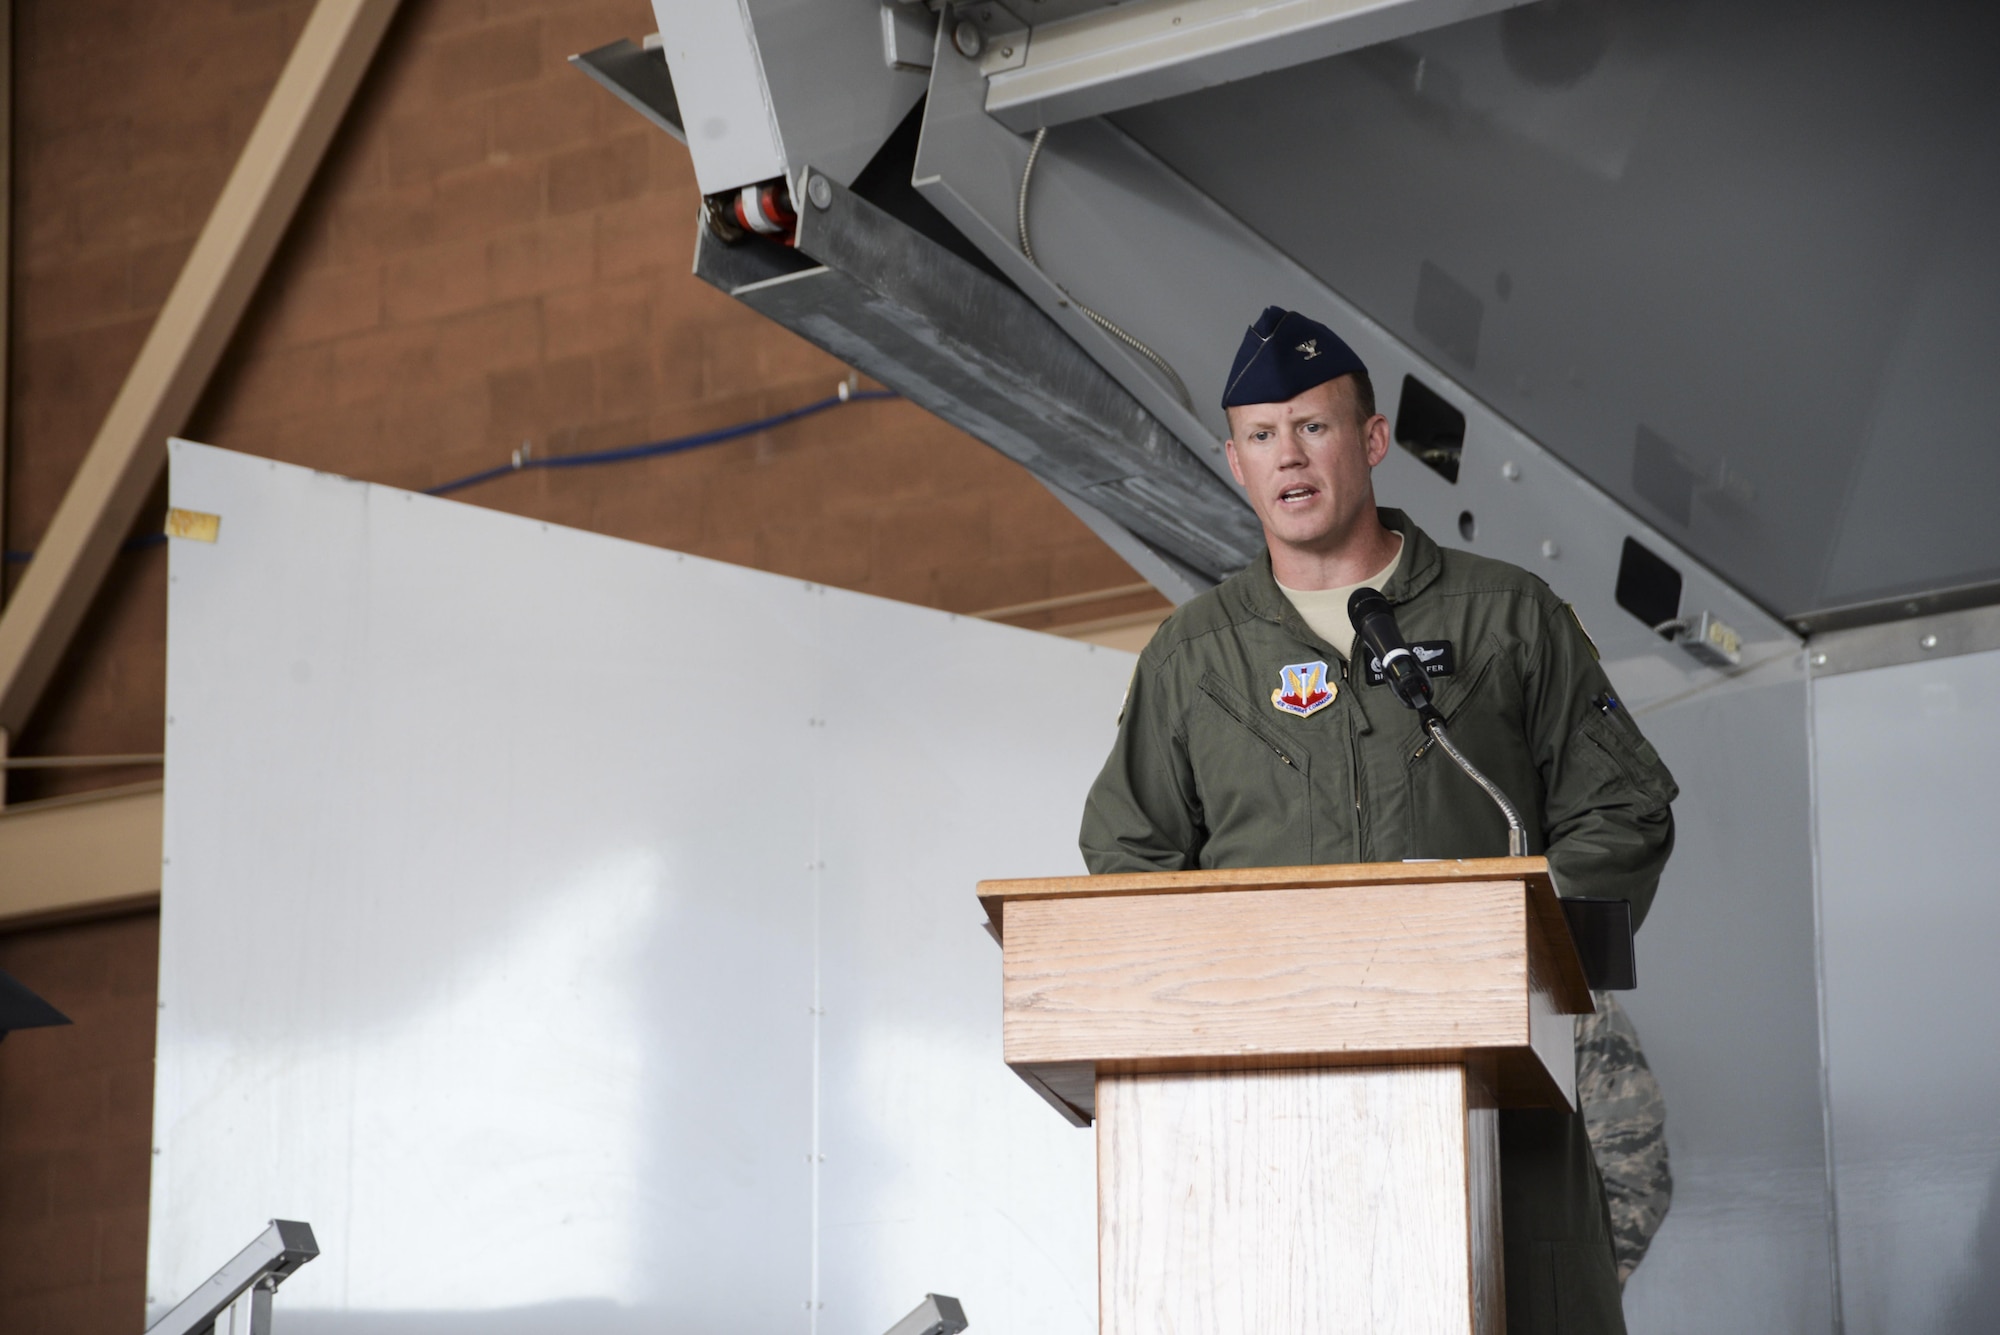 Col. Brian Schafer, 53rd Test and Evaluation Group commander, speaks to the crowd during the group’s change of command ceremony at Nellis Air Force Base, Nev., July 11, 2017. The mission of the 53rd TEG is to provide the warfighter with the latest in software, hardware, weapons and tactics, techniques and procedures. (U.S. Air Force photo by Airman 1st Class Andrew D. Sarver/Released)